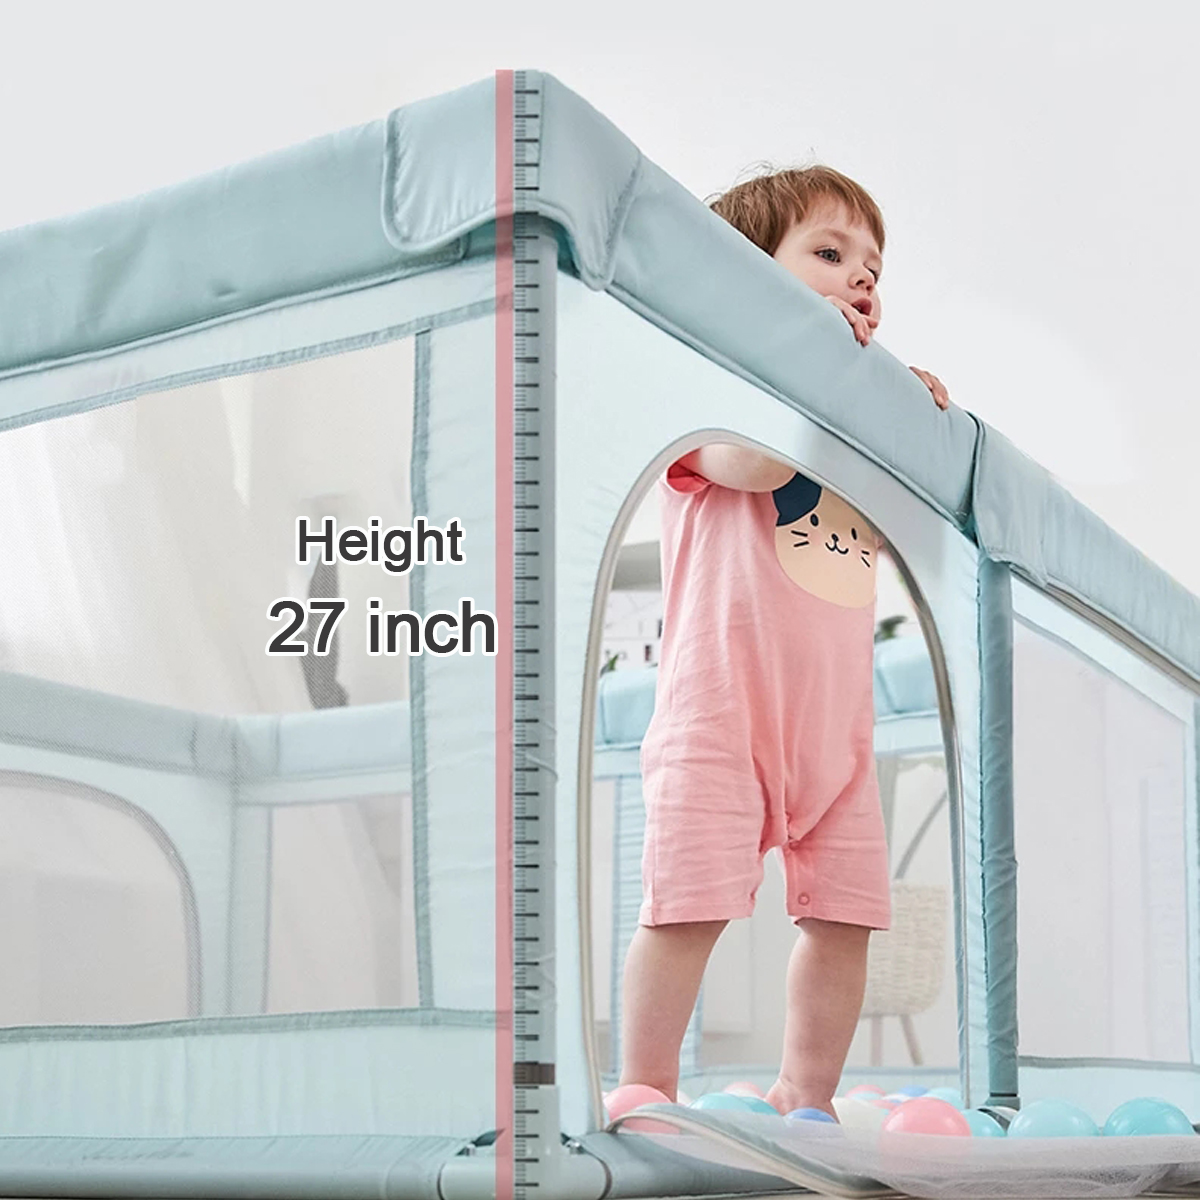 Baby-Playpen-Interactive-Safety-Indoor-Gate-Play-Yards-Tent-Court-Foldable-Portable-Kids-Furniture-f-1878434-9